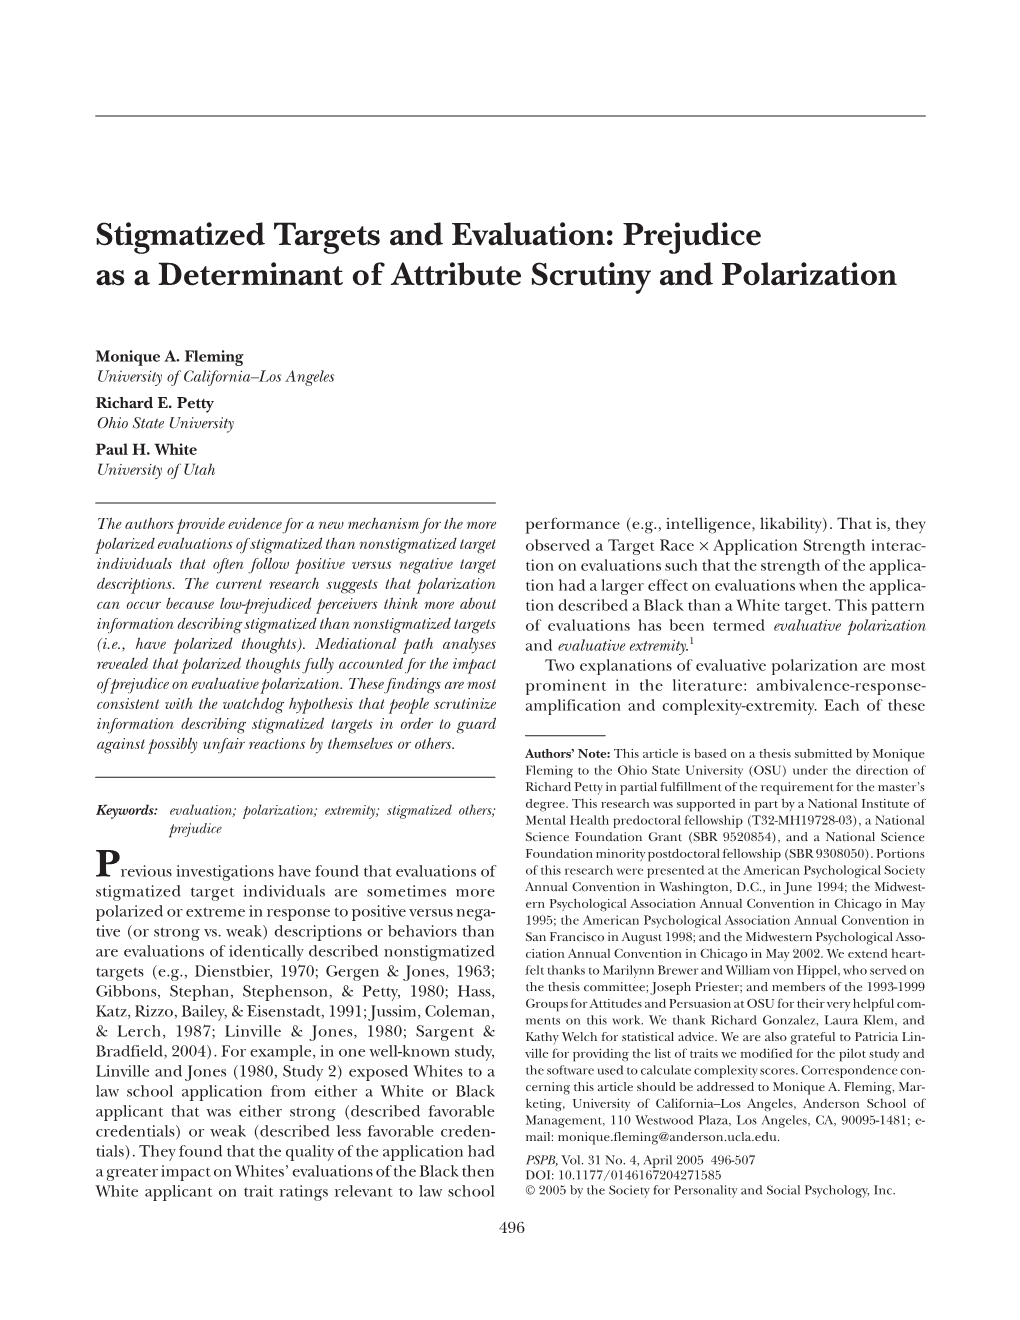 Stigmatized Targets and Evaluation: Prejudice As a Determinant of Attribute Scrutiny and Polarization